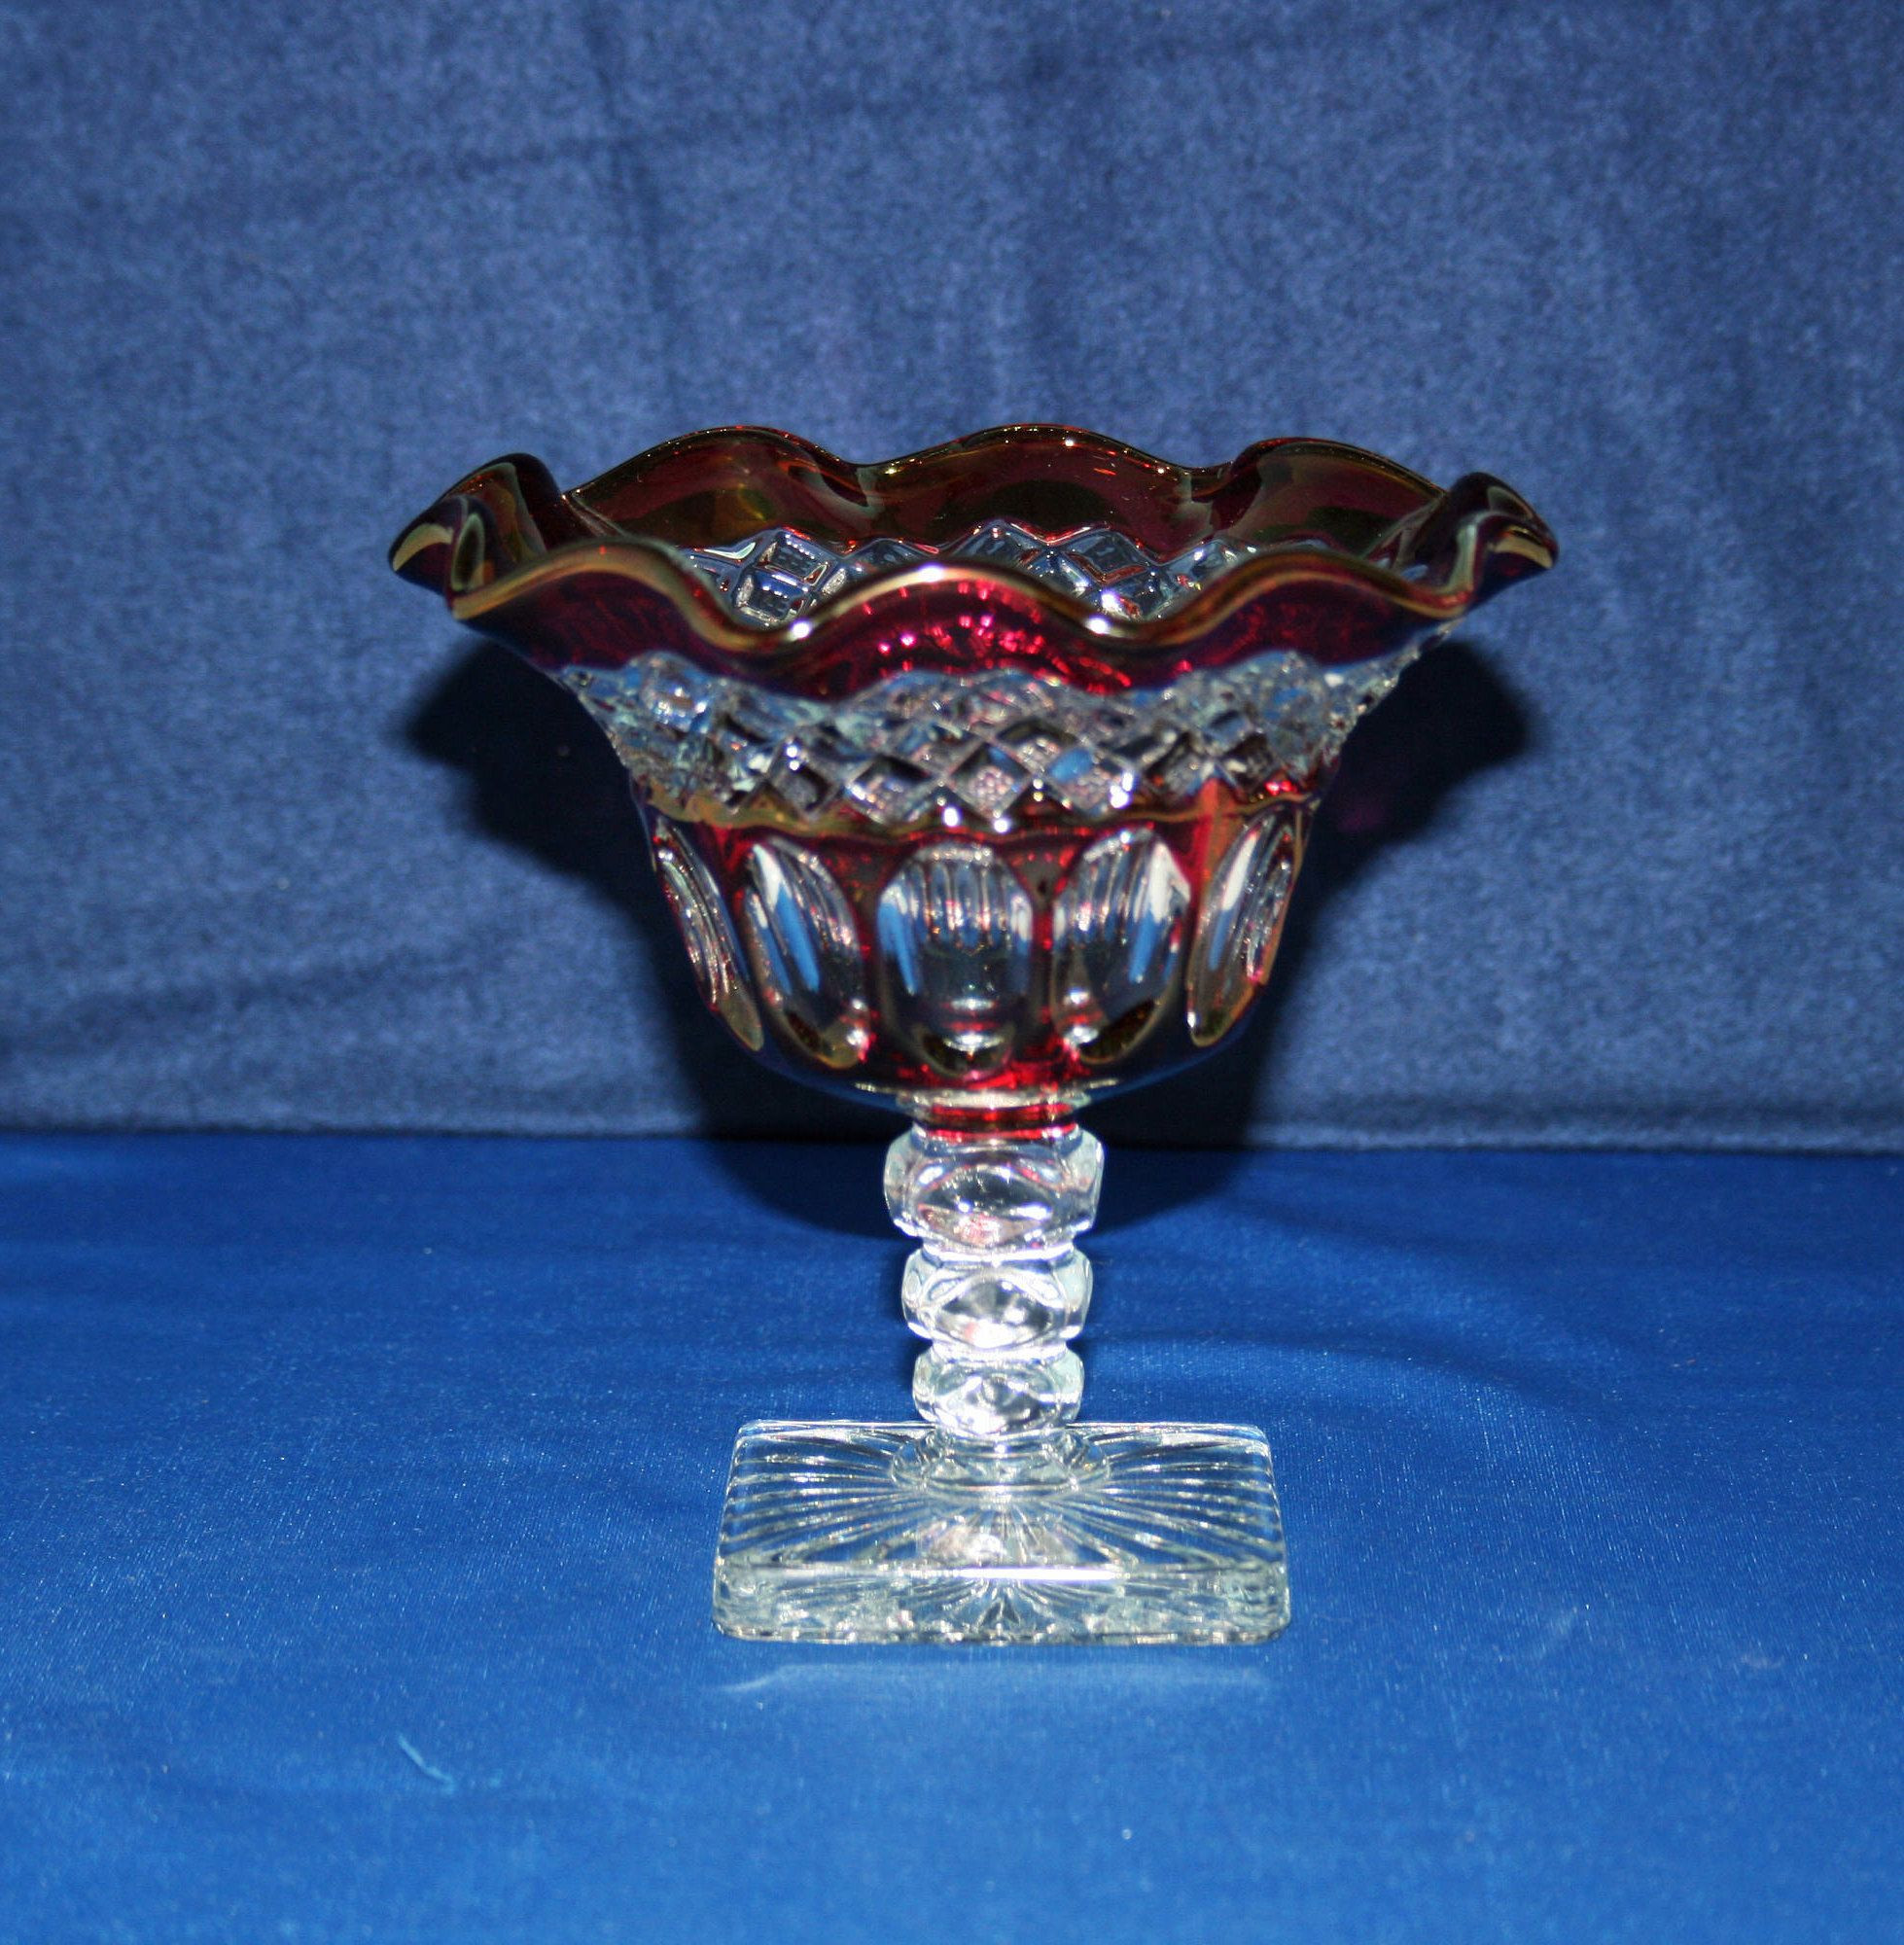 17 Elegant Waterford Crystal Vase 14 Inch 2024 free download waterford crystal vase 14 inch of vintage pair 6 inch pressed glass candlesticks with hand c with regard to vintage westmoreland waterford crimped ruffle pedestal compote crystal ruby on cle